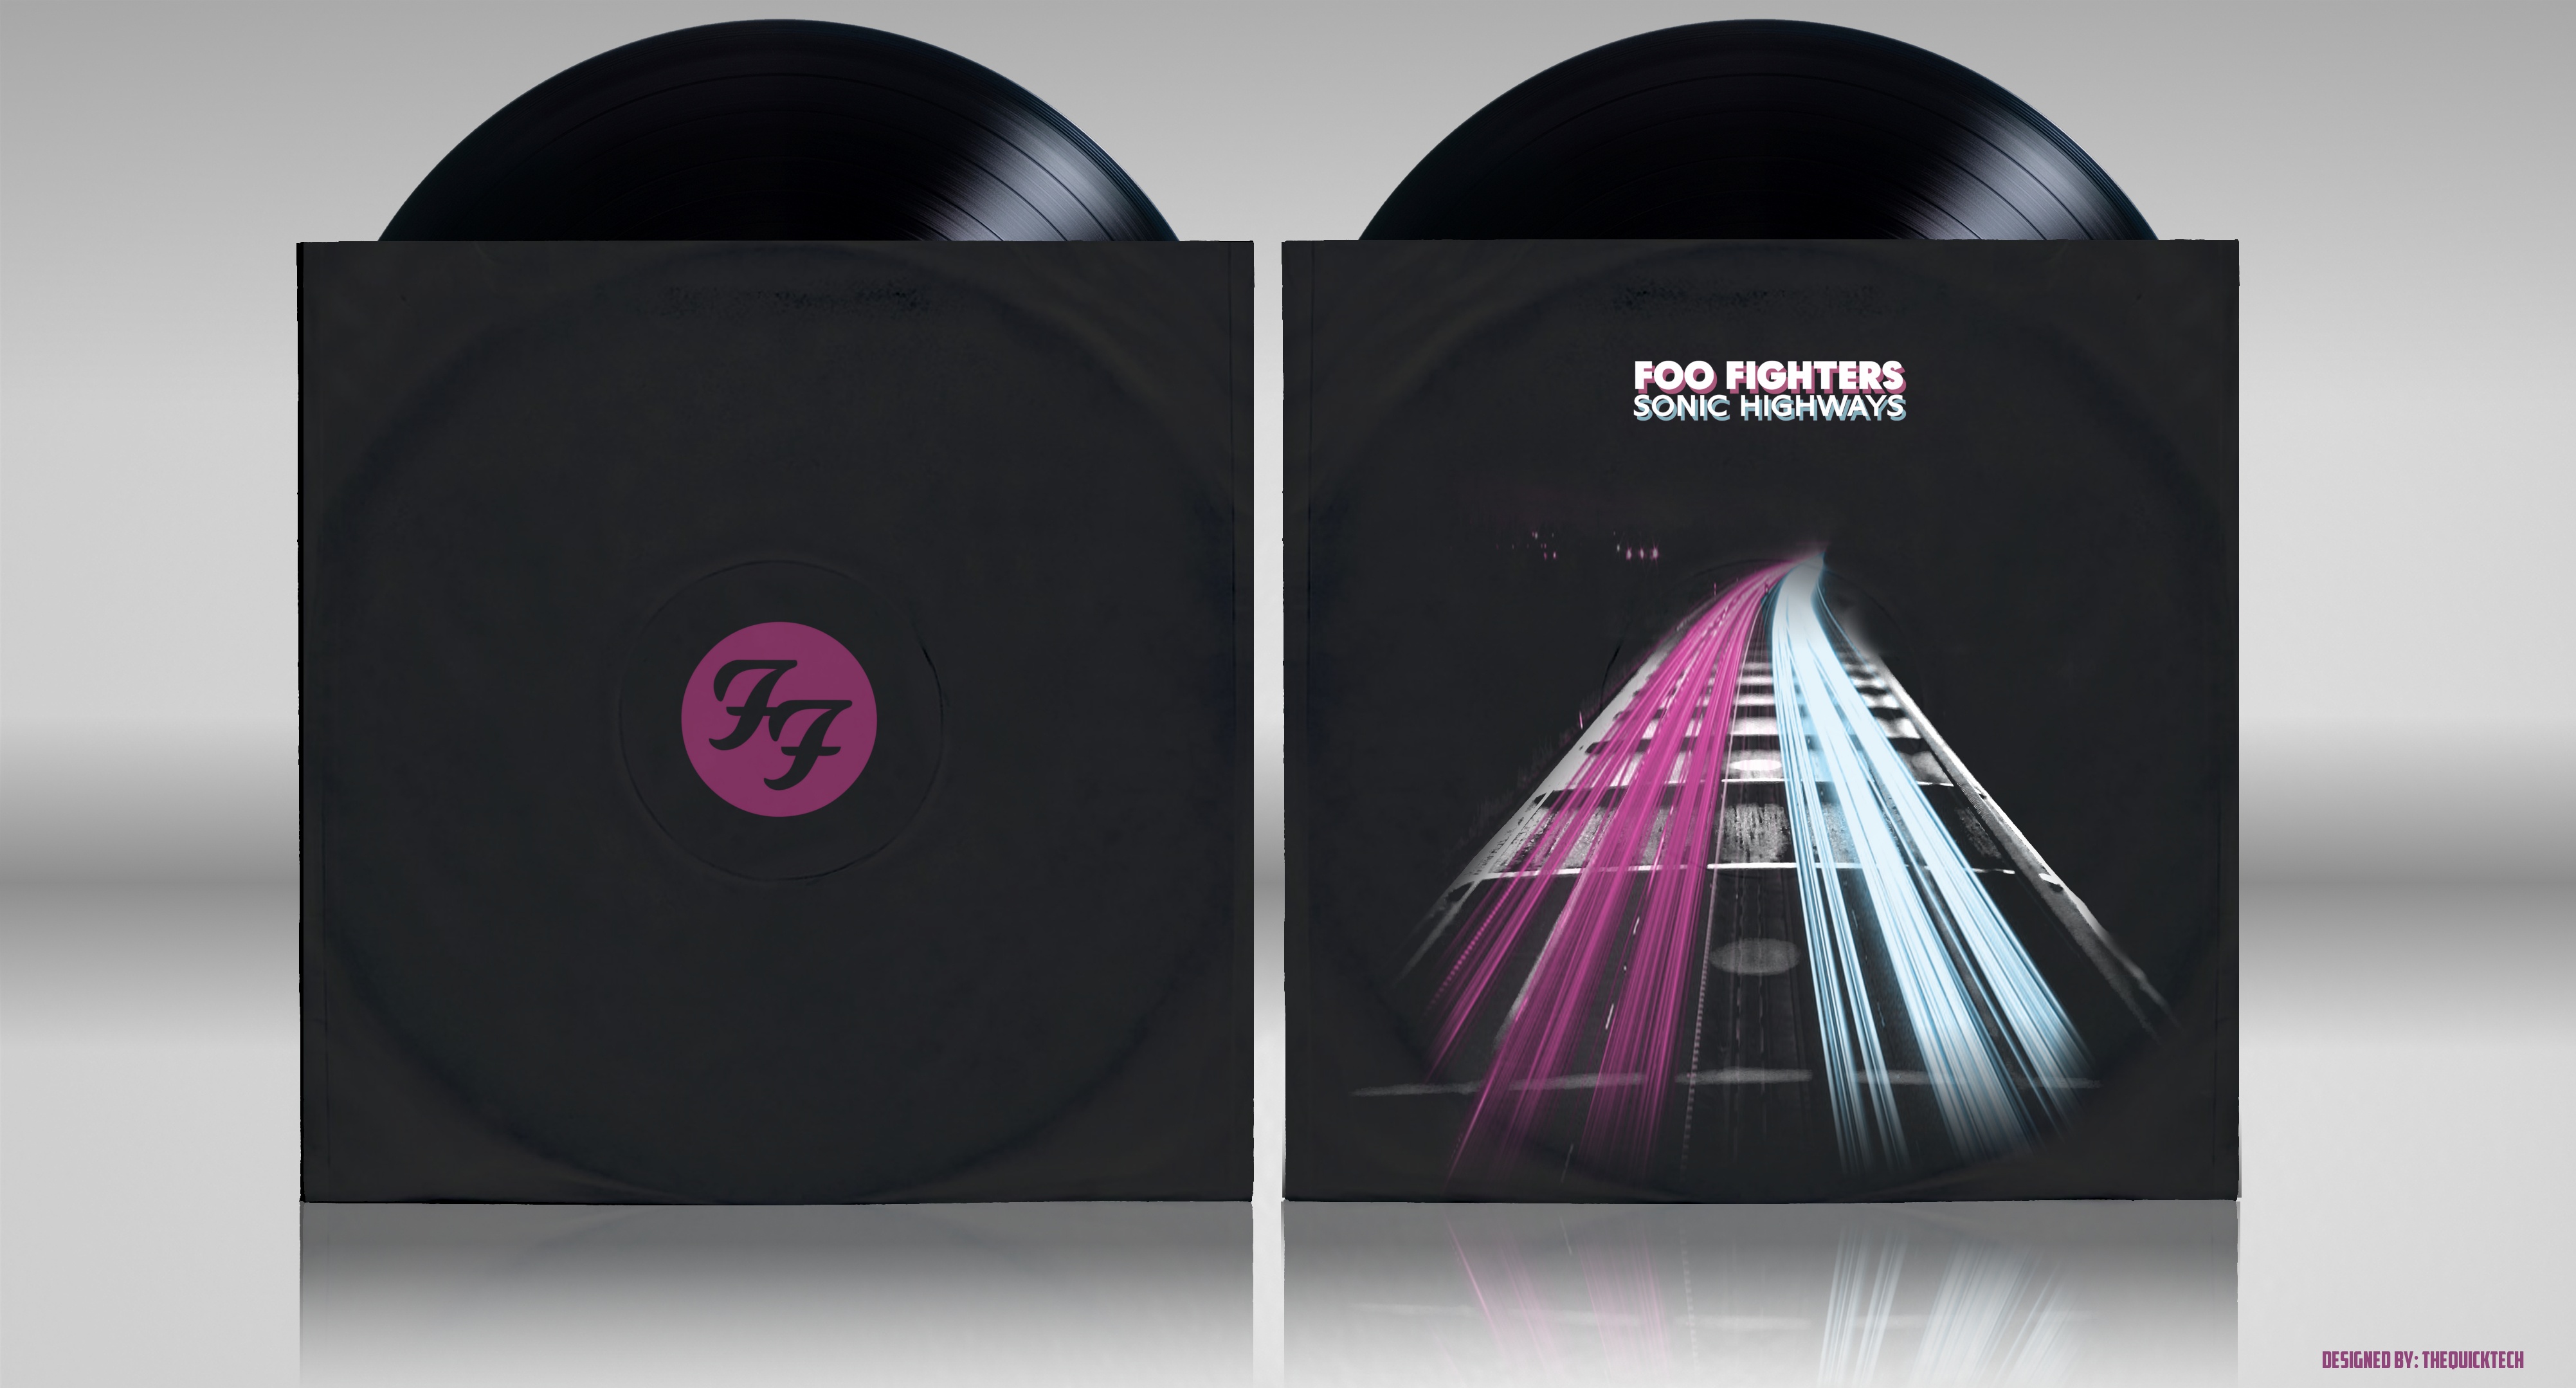 Foo Fighters - Sonic Highways box cover